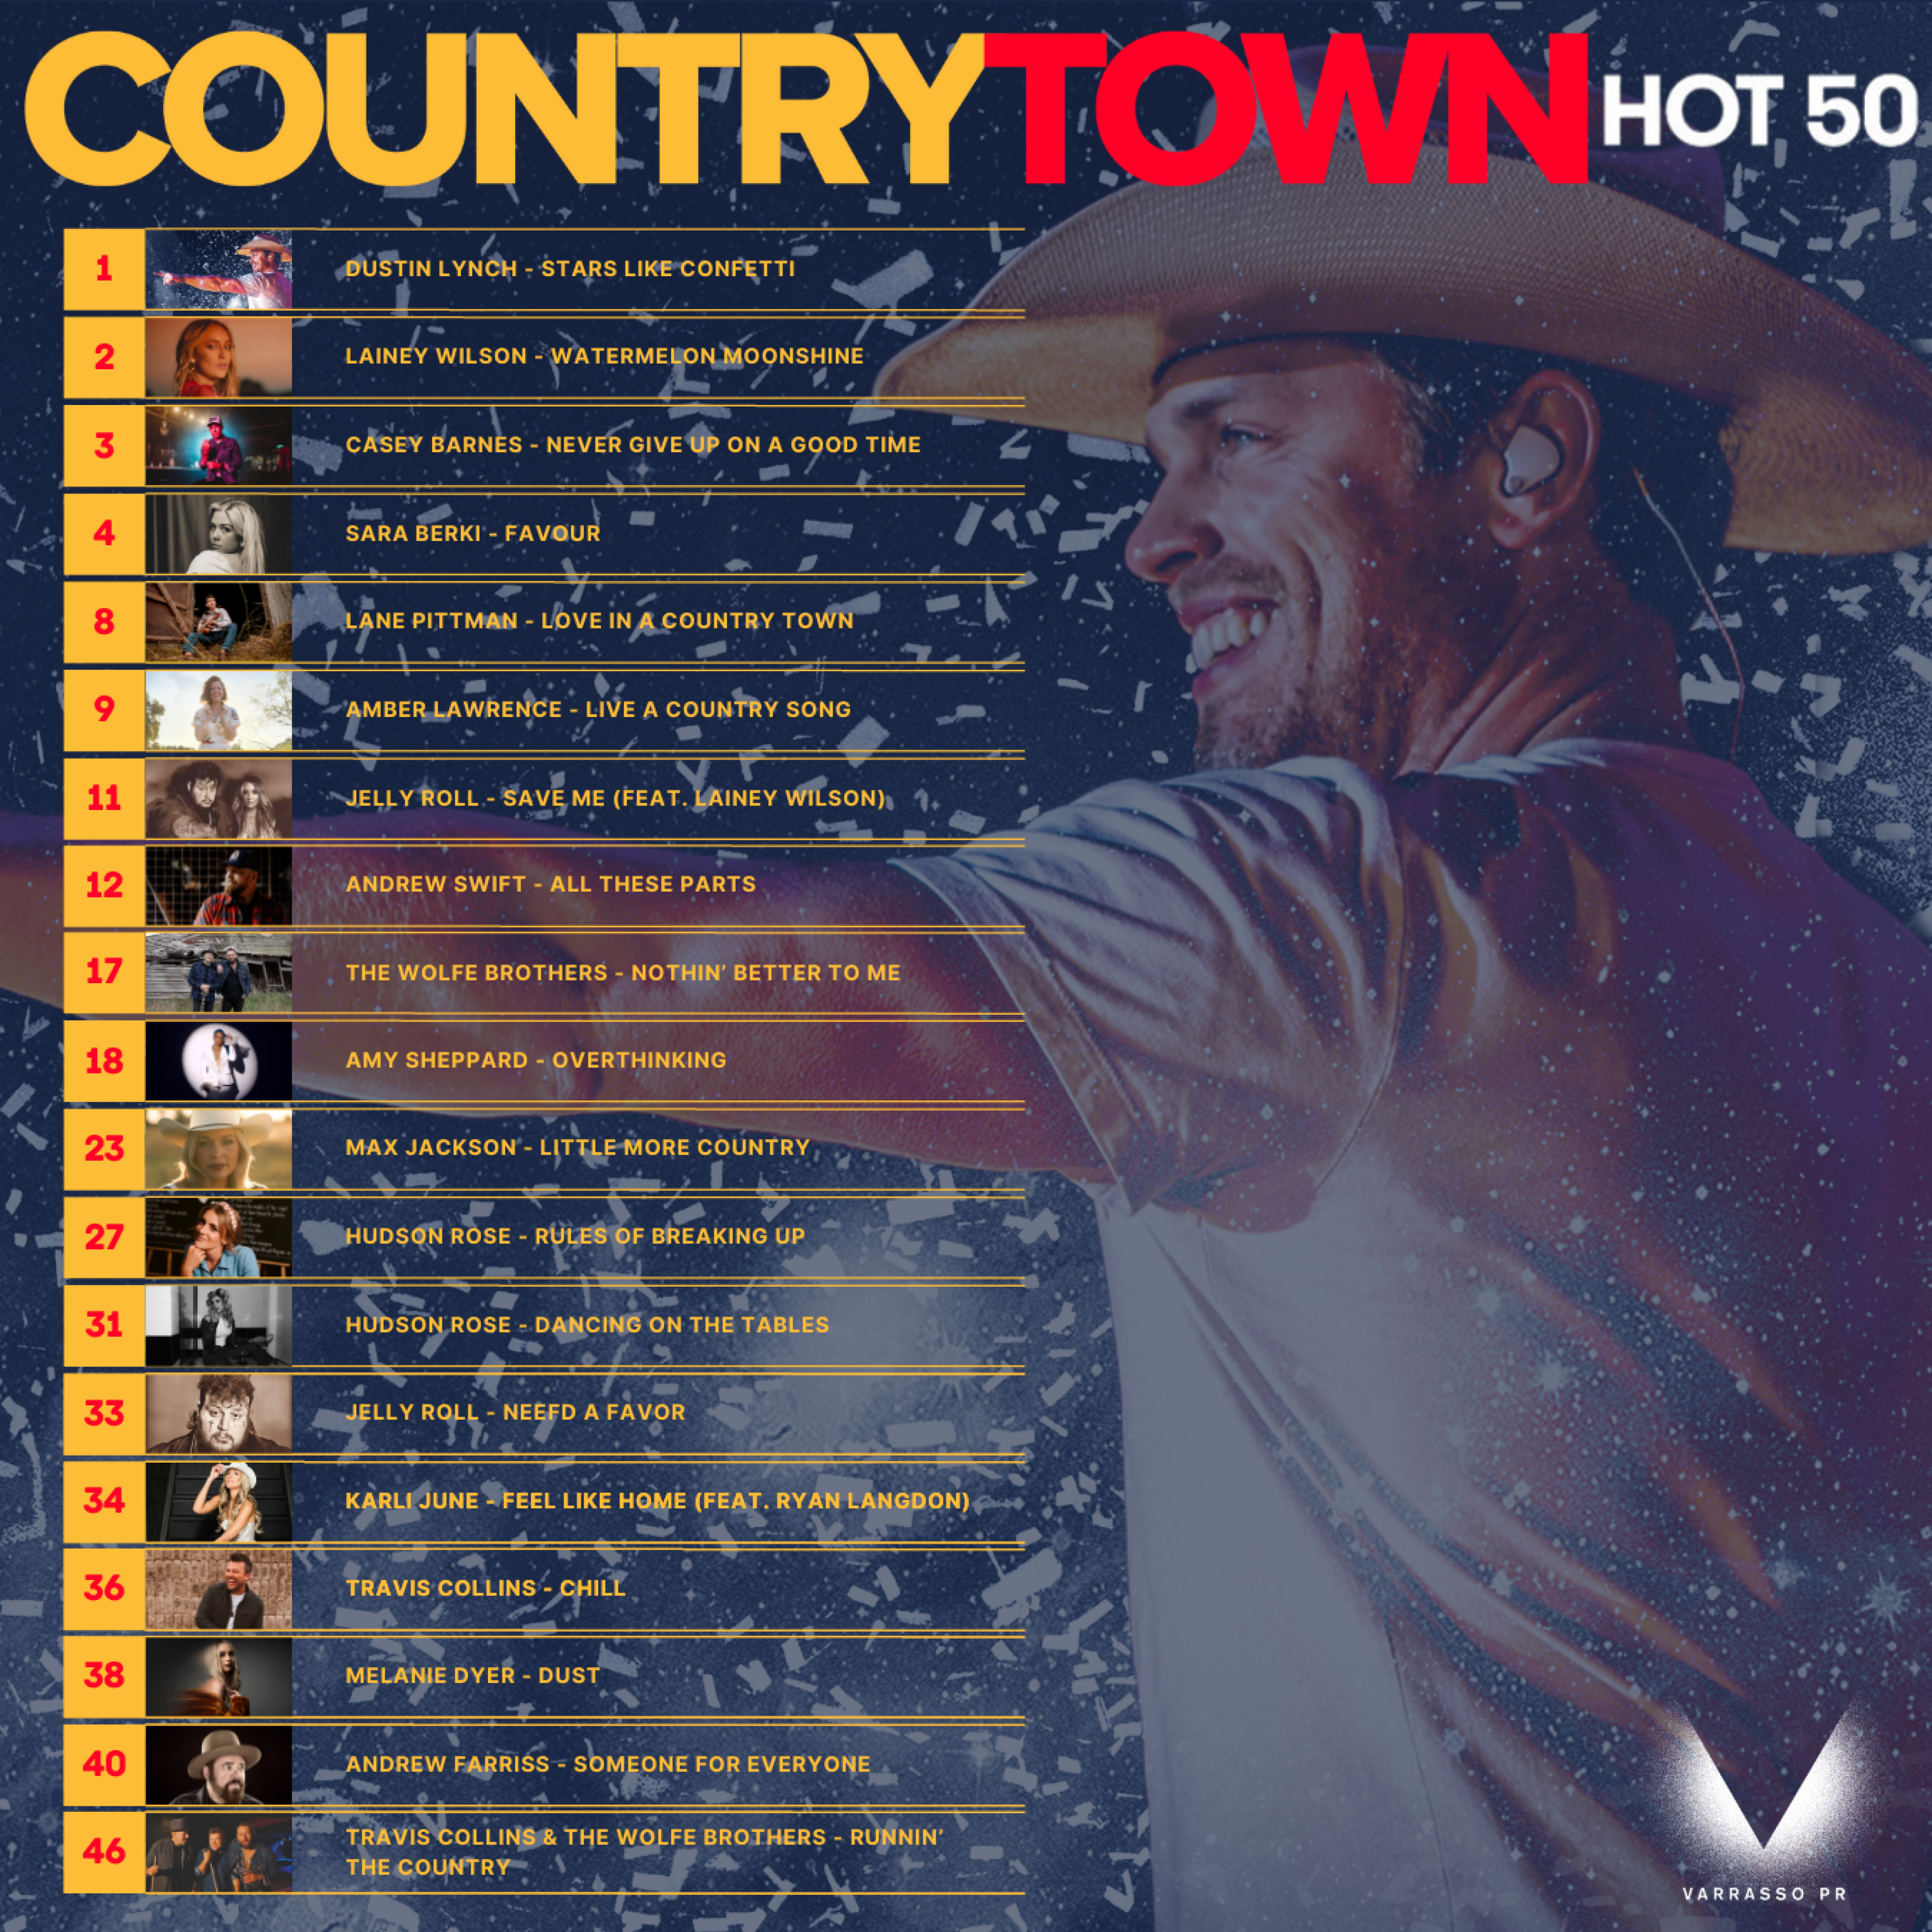 Dustin Lynch remains #1 on the CountryTown National Airplay Chart for the 2nd consecutive week